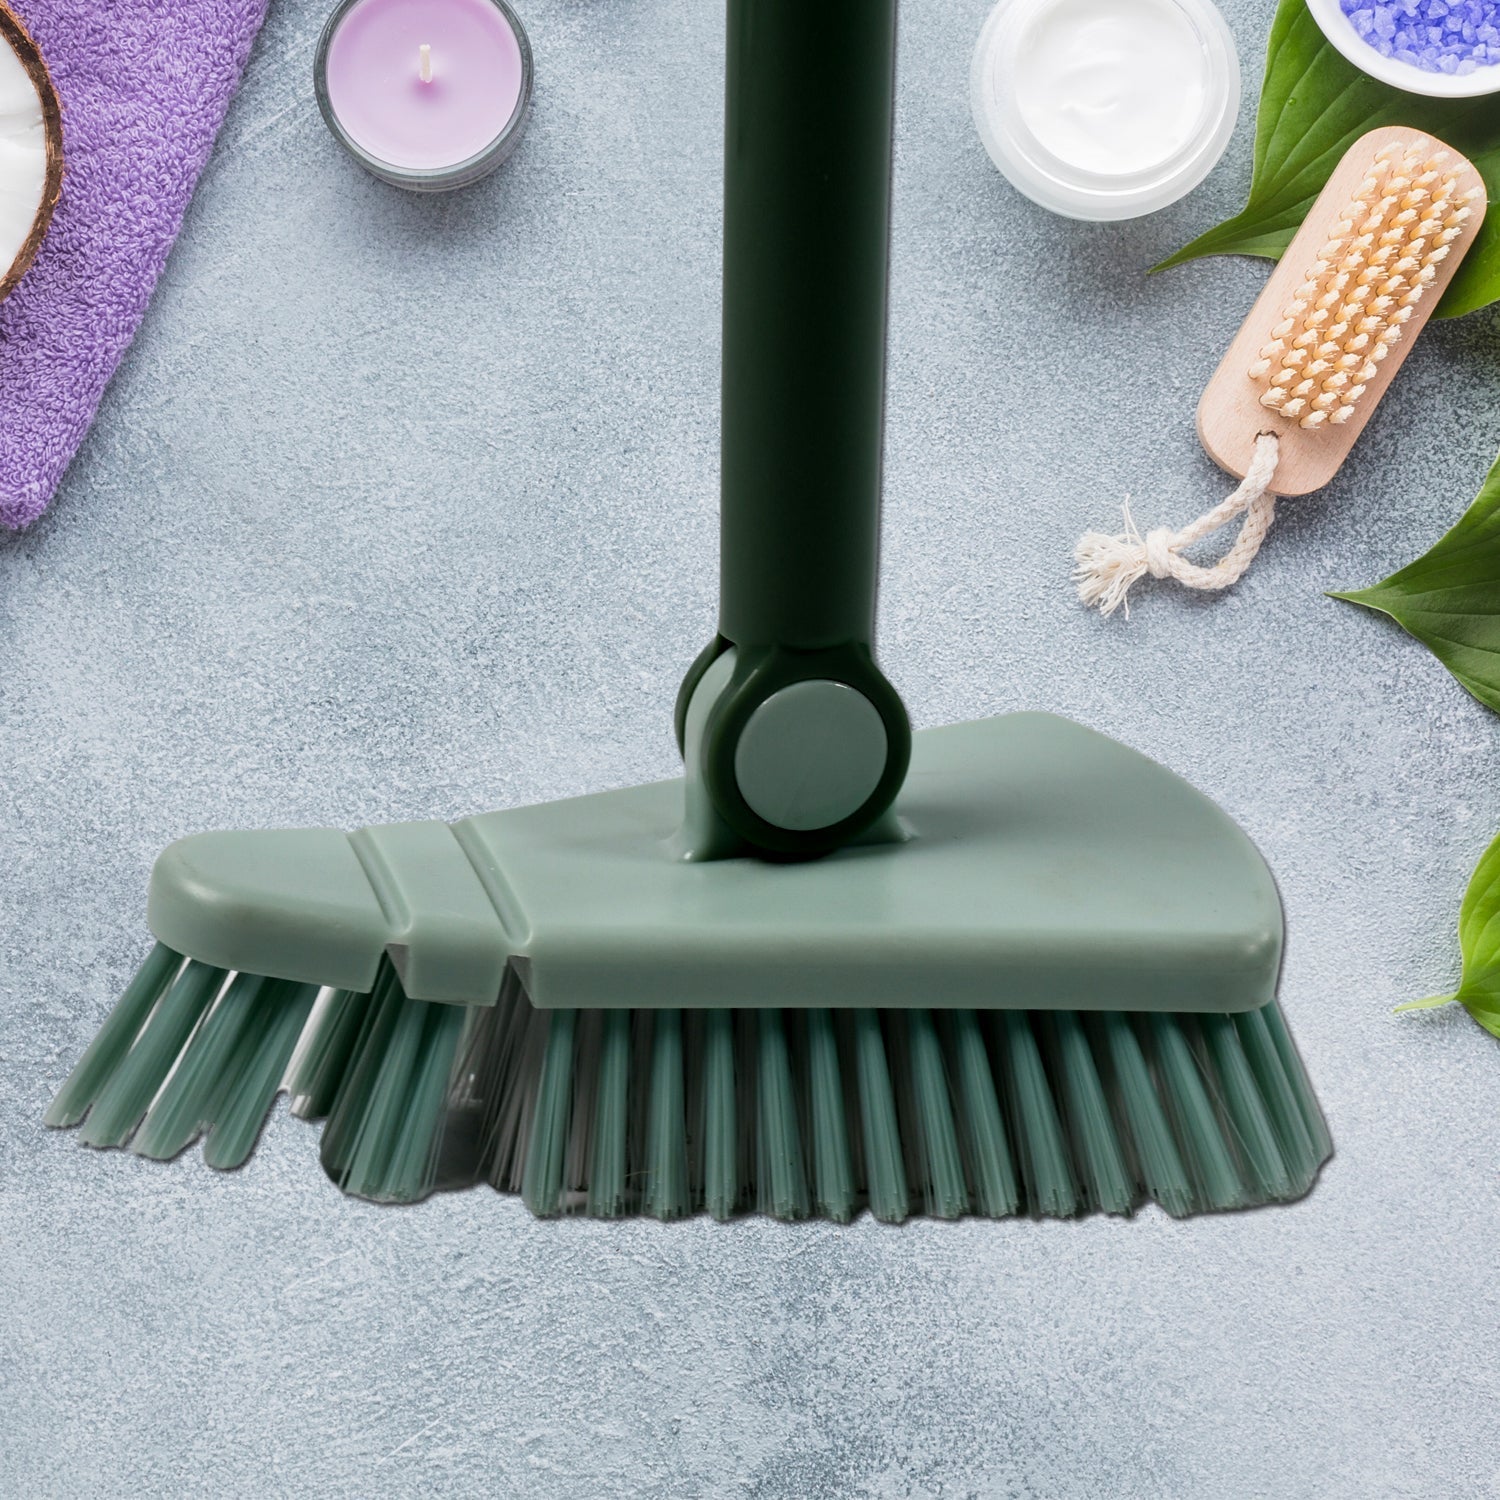 7878 Retractable Long Handle rotatable Floor Brush, with Sturdy Rotating Head, with Removable Triangular Head Cleaning Brush, Suitable for Home Bathroom and Kitchen. JK Trends